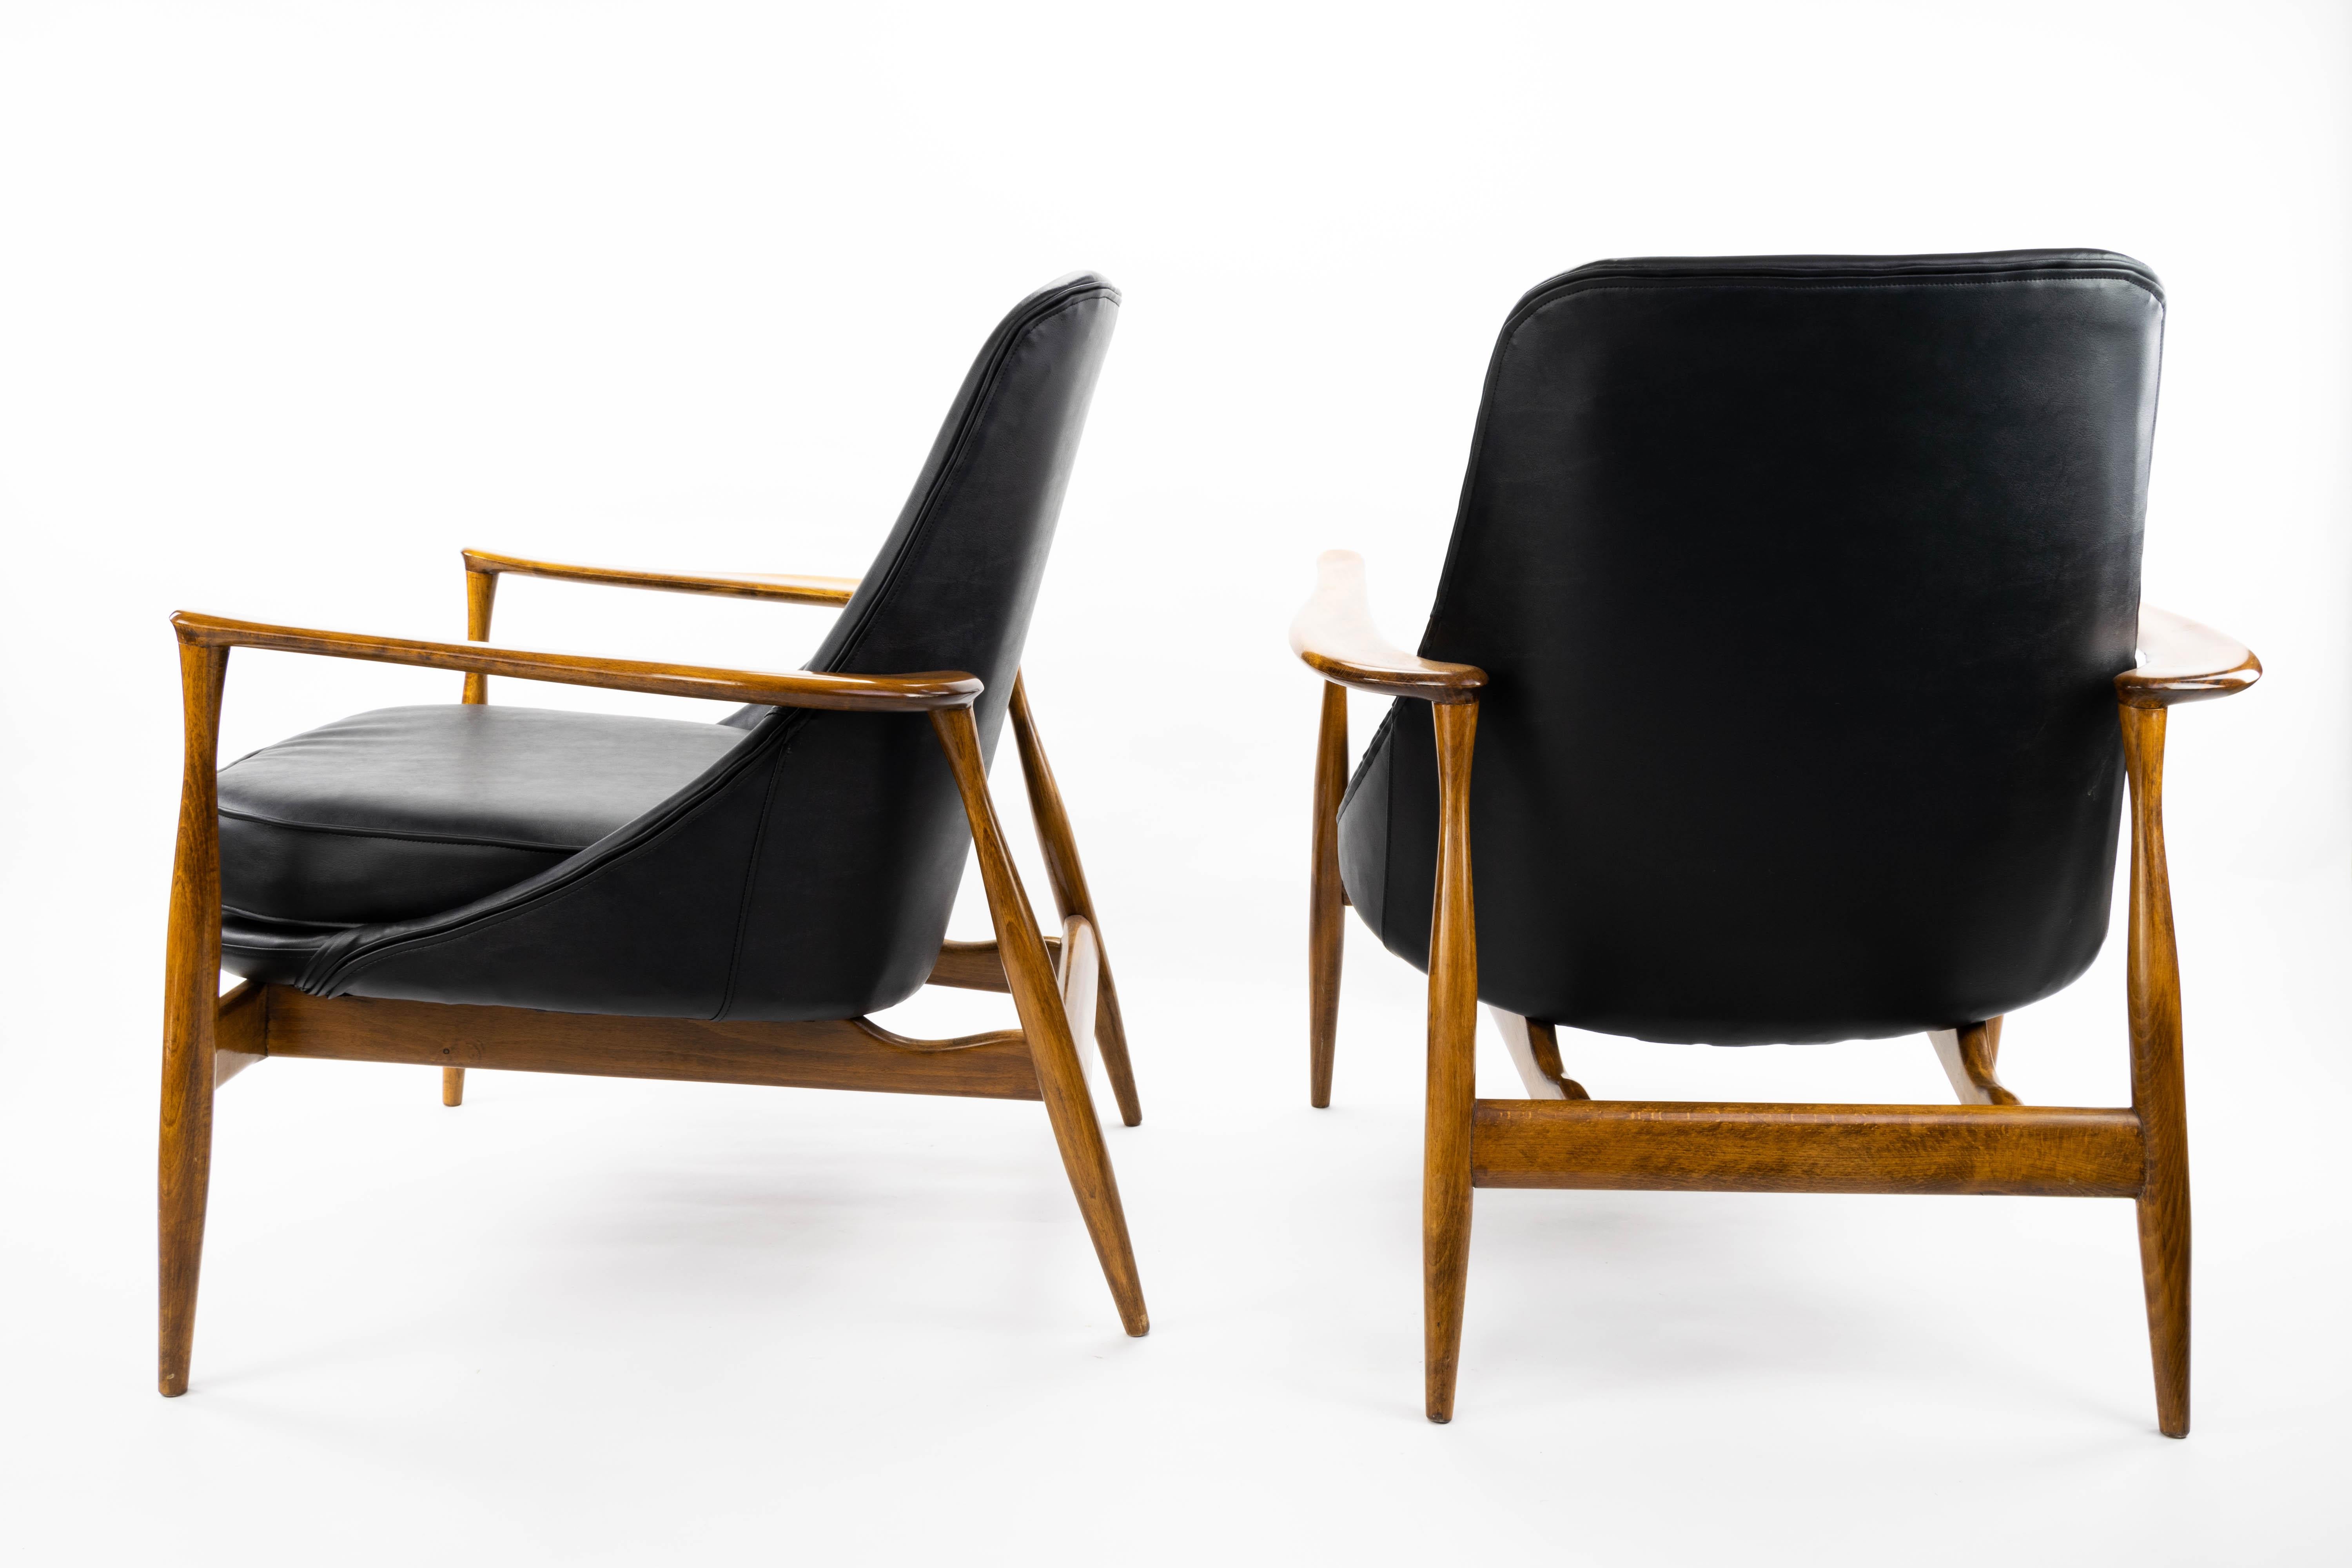 Danish armchairs designed by Ib Kofod Larsen  1956. Oak wooden structure recently restored and new upholstery in high-quality imitation leather.
Measurements:
Height 80 cm
Seat height 42 cm
High armrest 56.5 cm
Width 73 cm
Depth 73 cm.